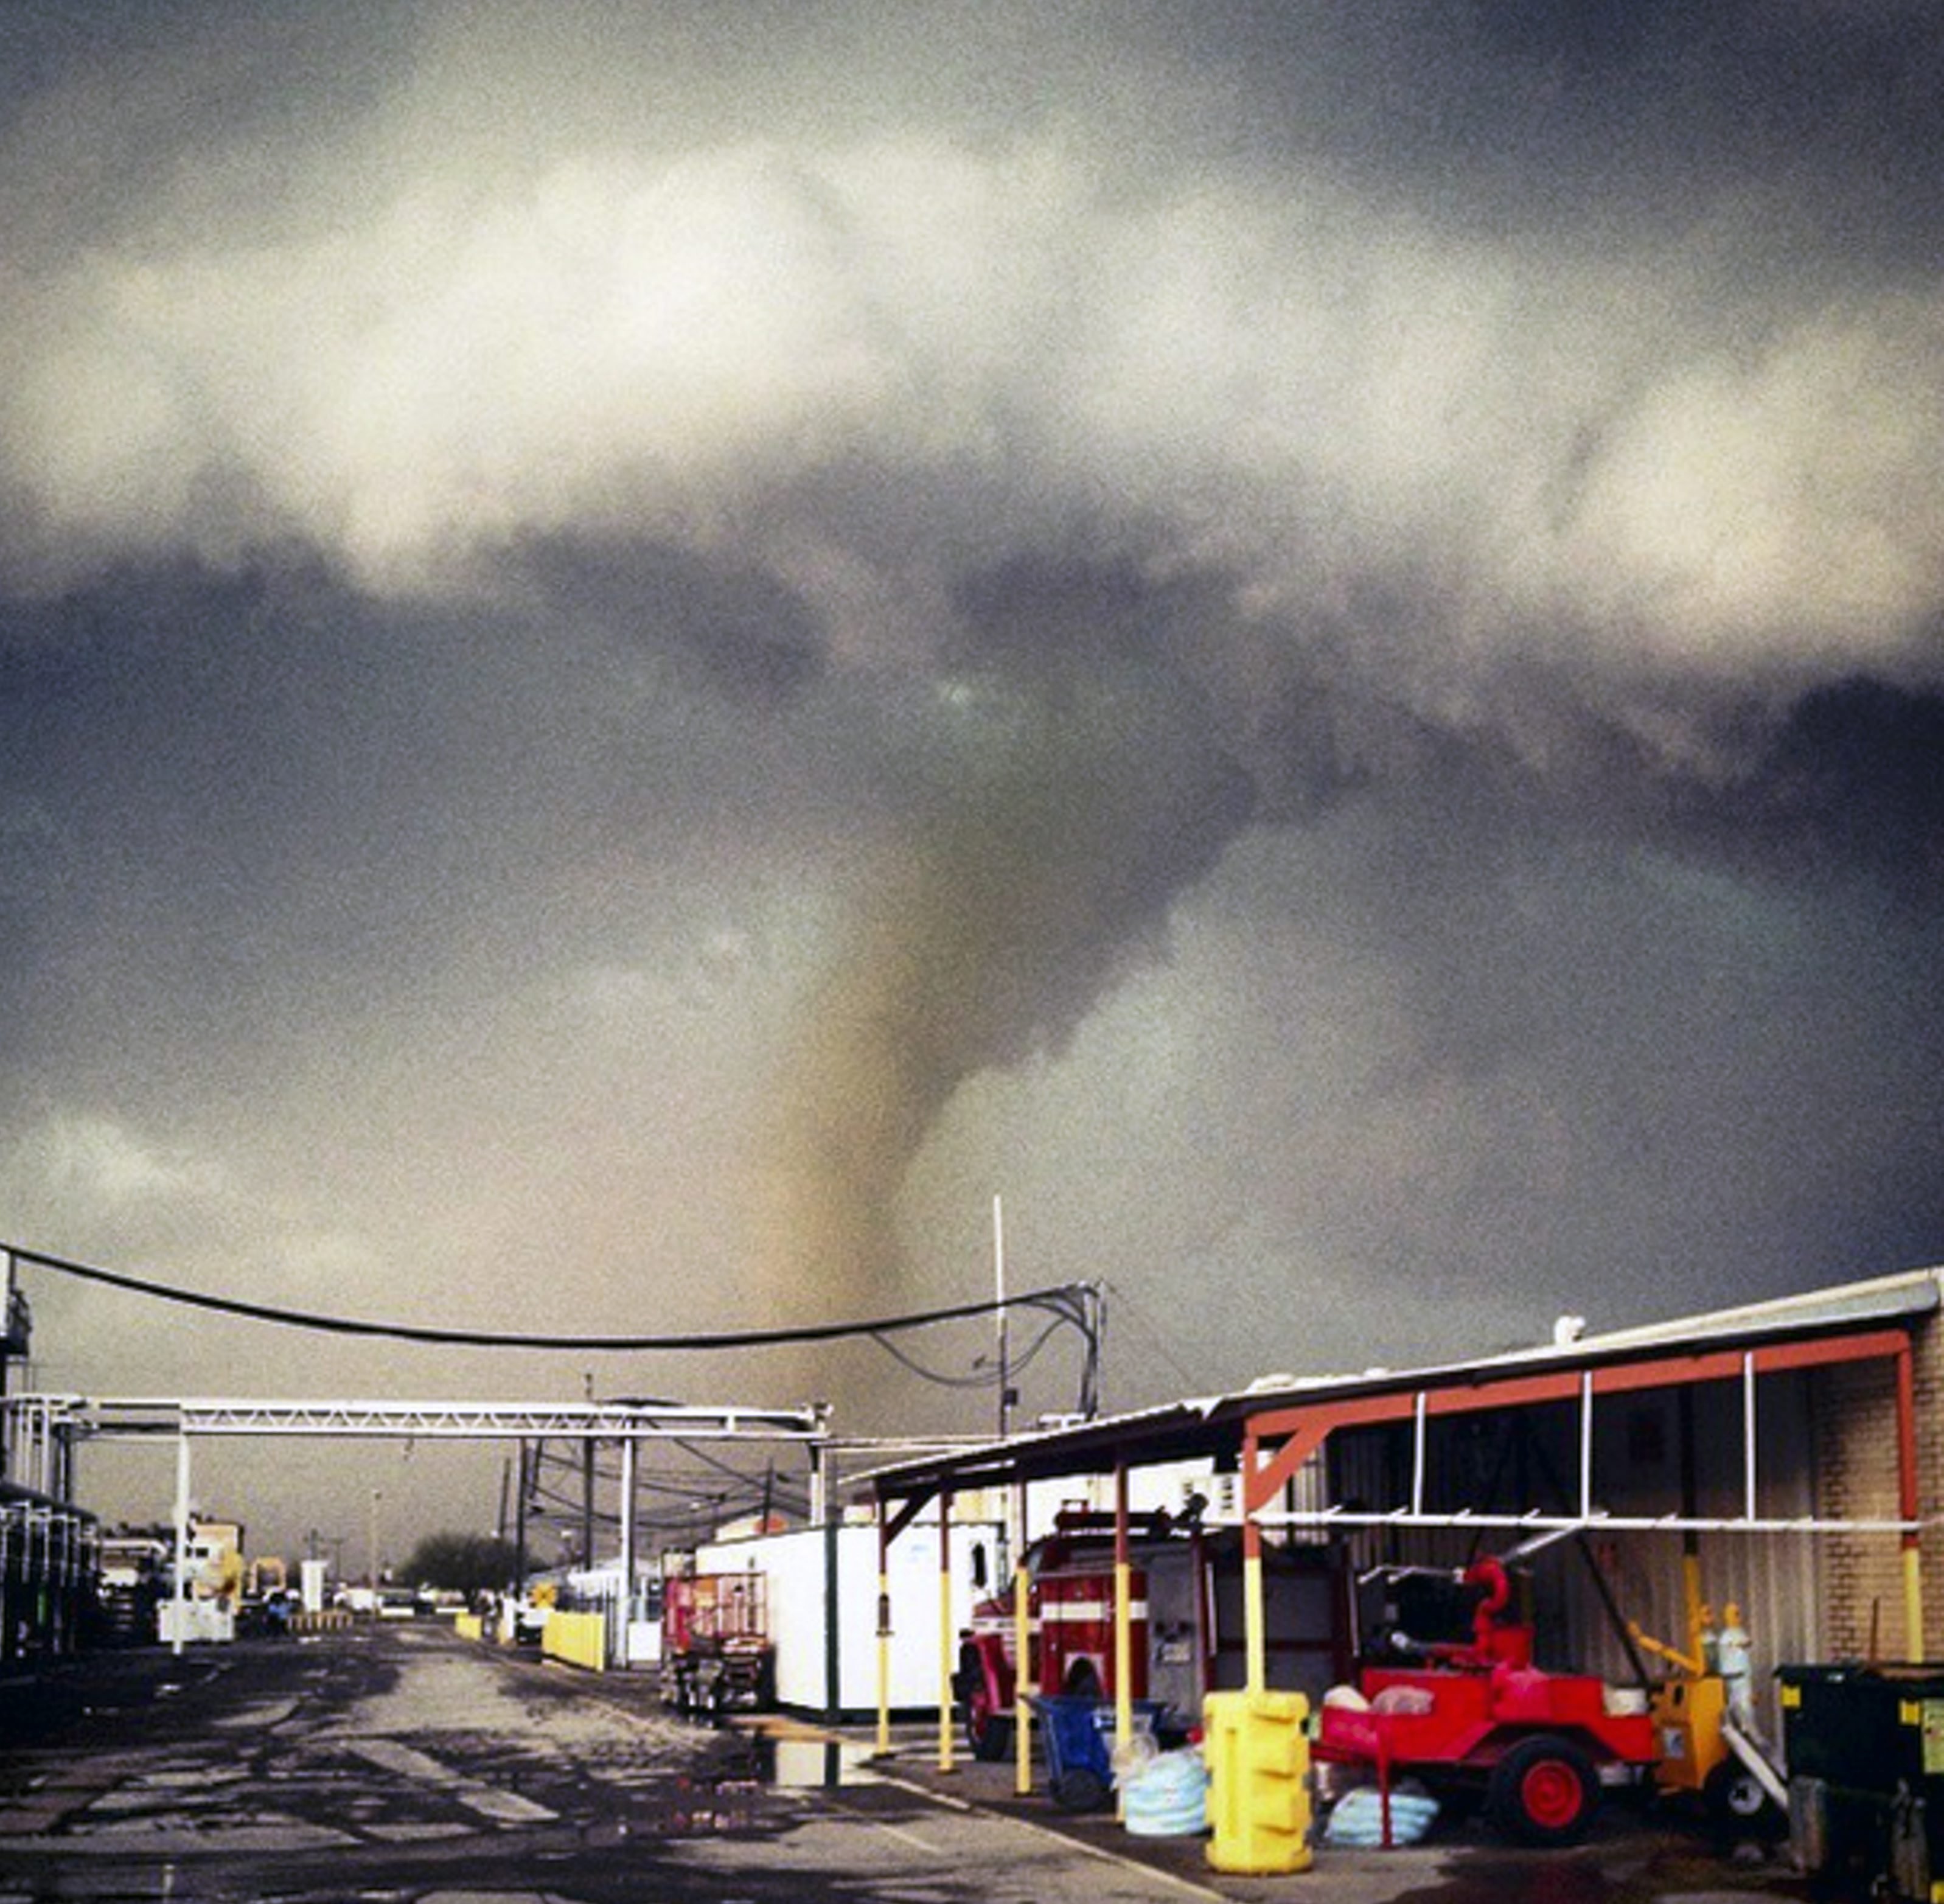 The funnel cloud of a tornado reaches down to the ground as a storm approaches Sand Springs, Okla. on March 25, 2015.